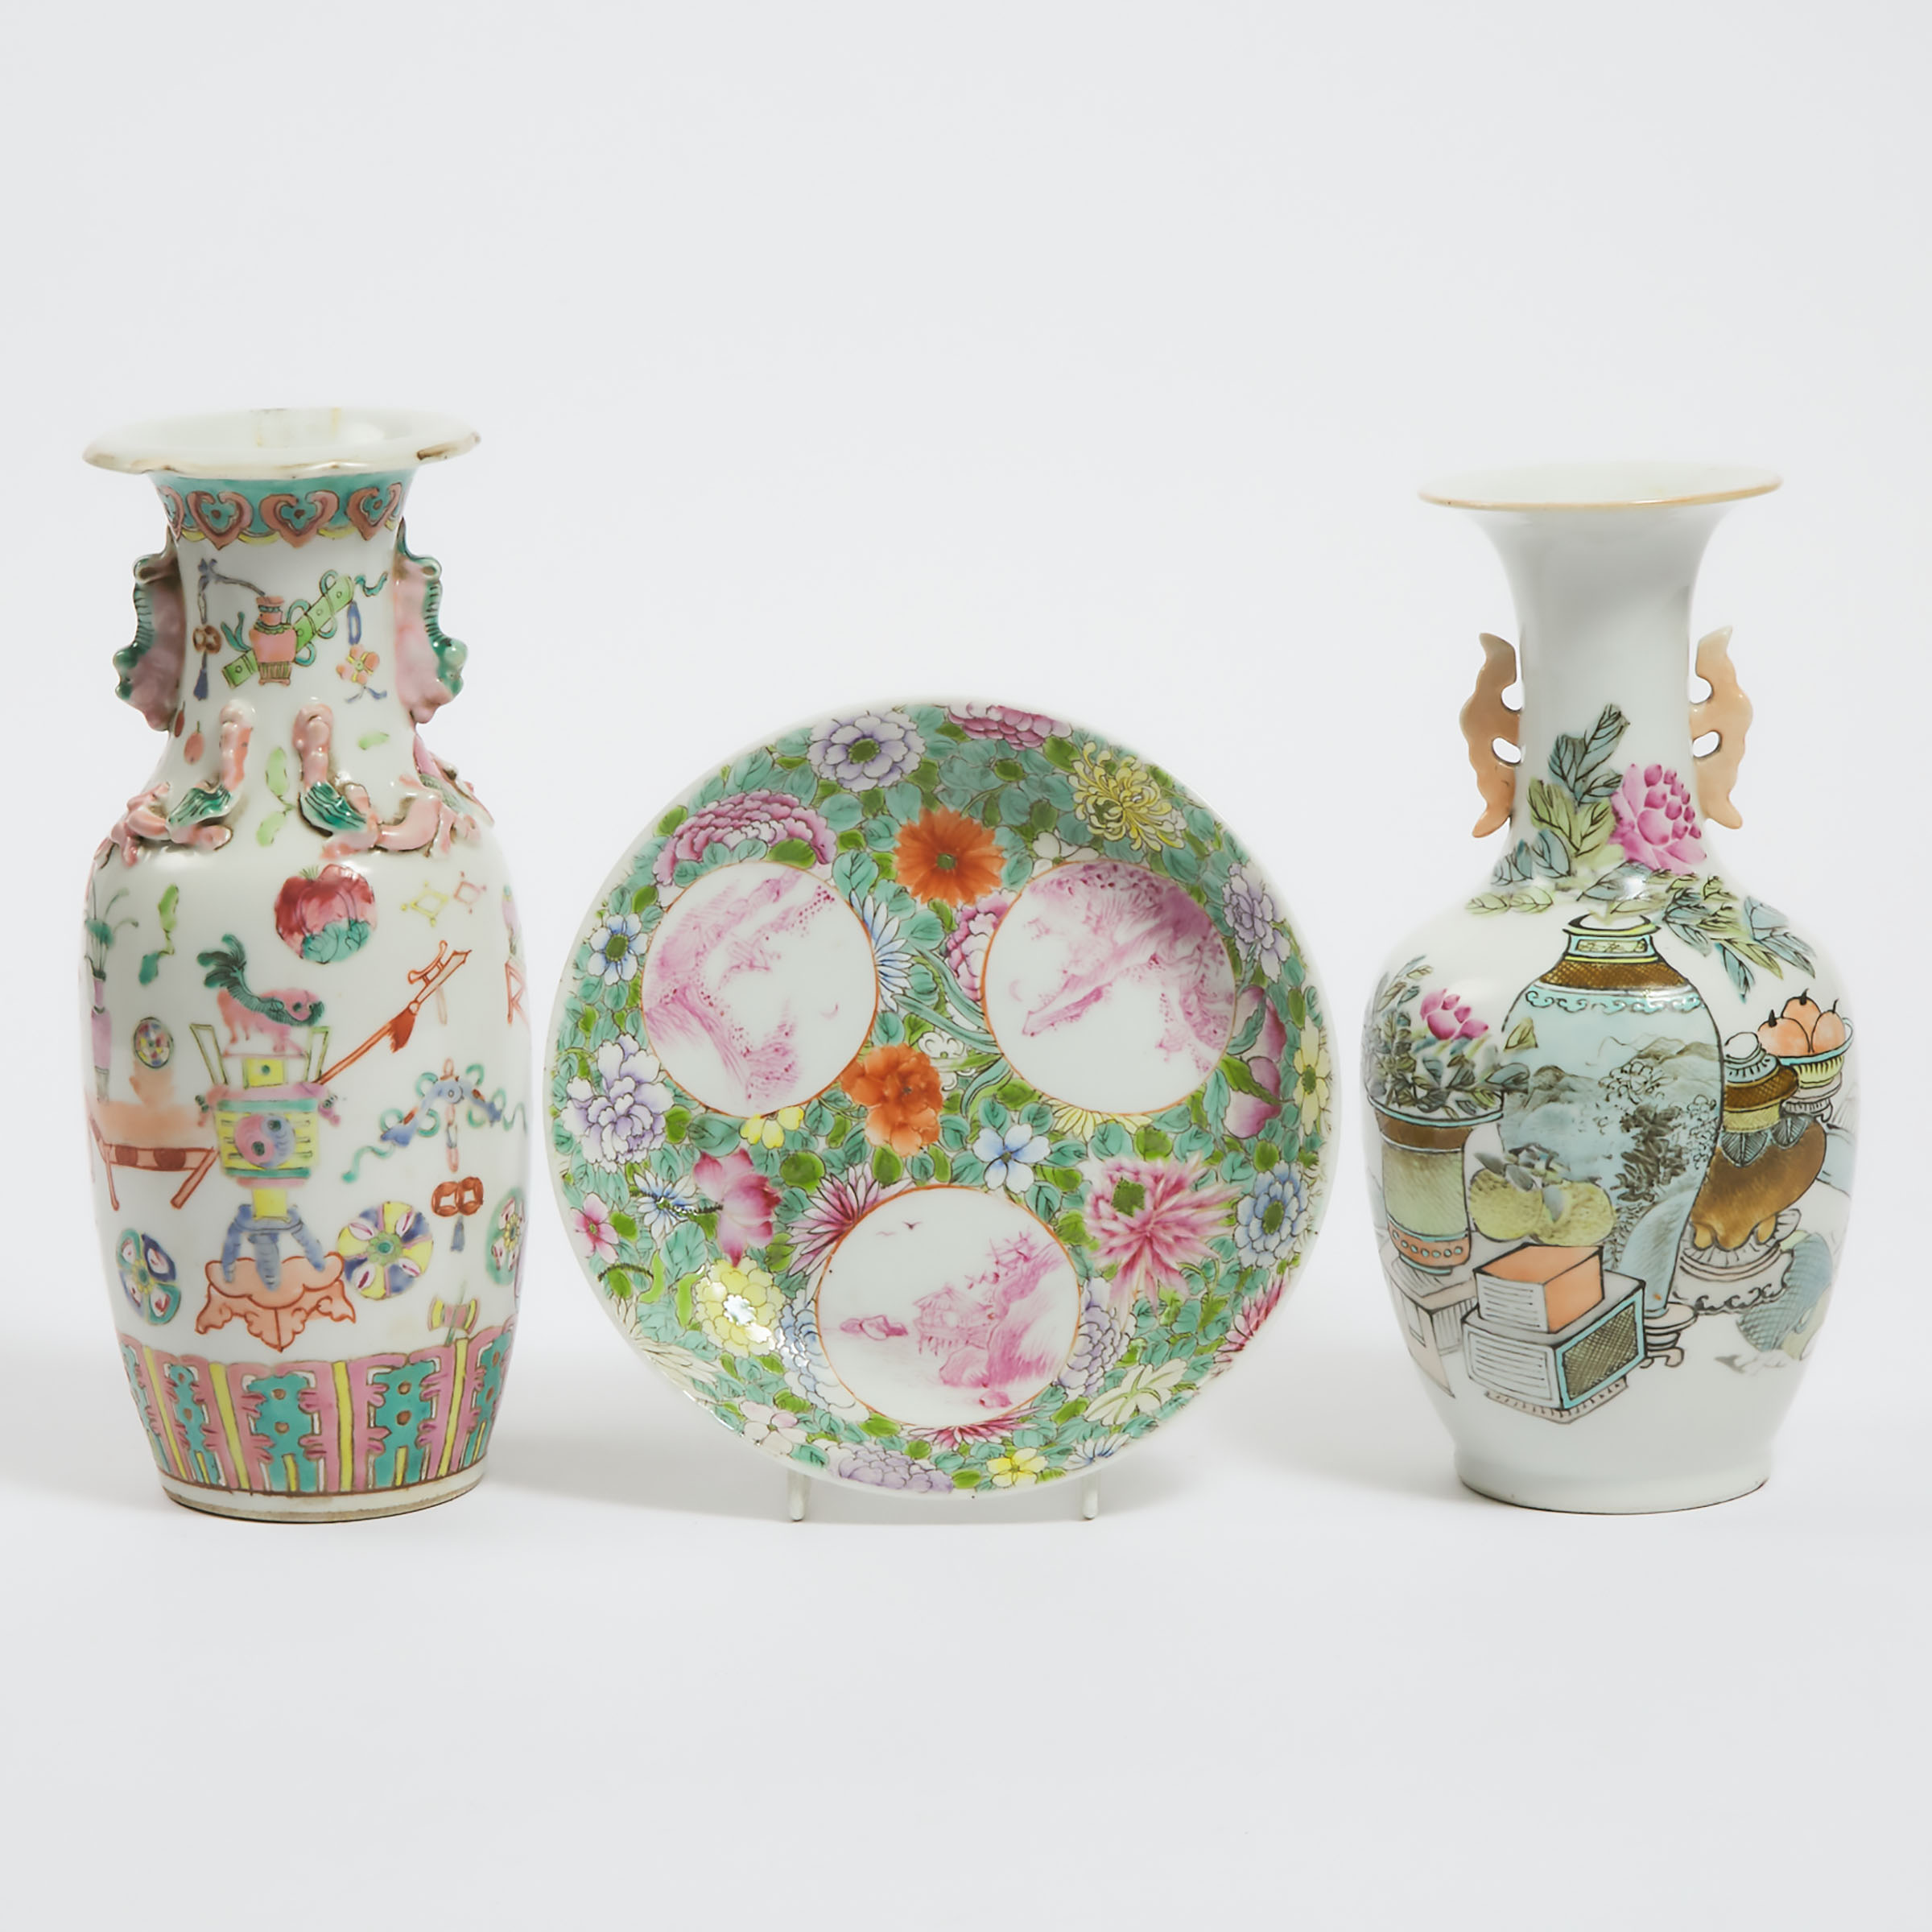 A Famille Rose 'Medallion' Dish, Jurentang Mark, Together With Two Vases, 19th Century and Later